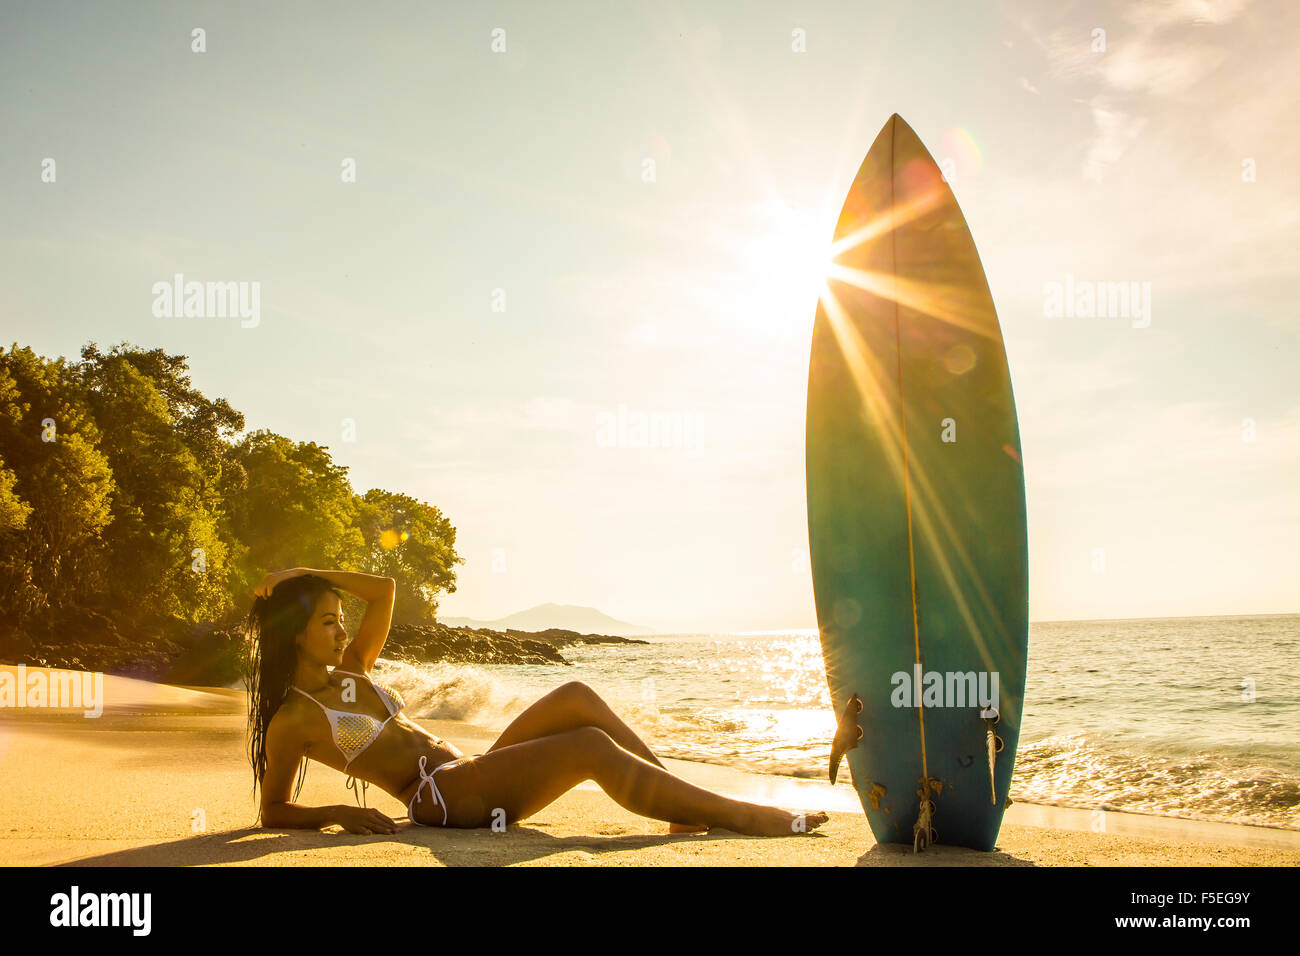 Young Woman without Bra on the Tropical Beach of Bali Island. Bikini Girl  Freedom Concept. Indonesia. Stock Image - Image of body, brunette: 97514907